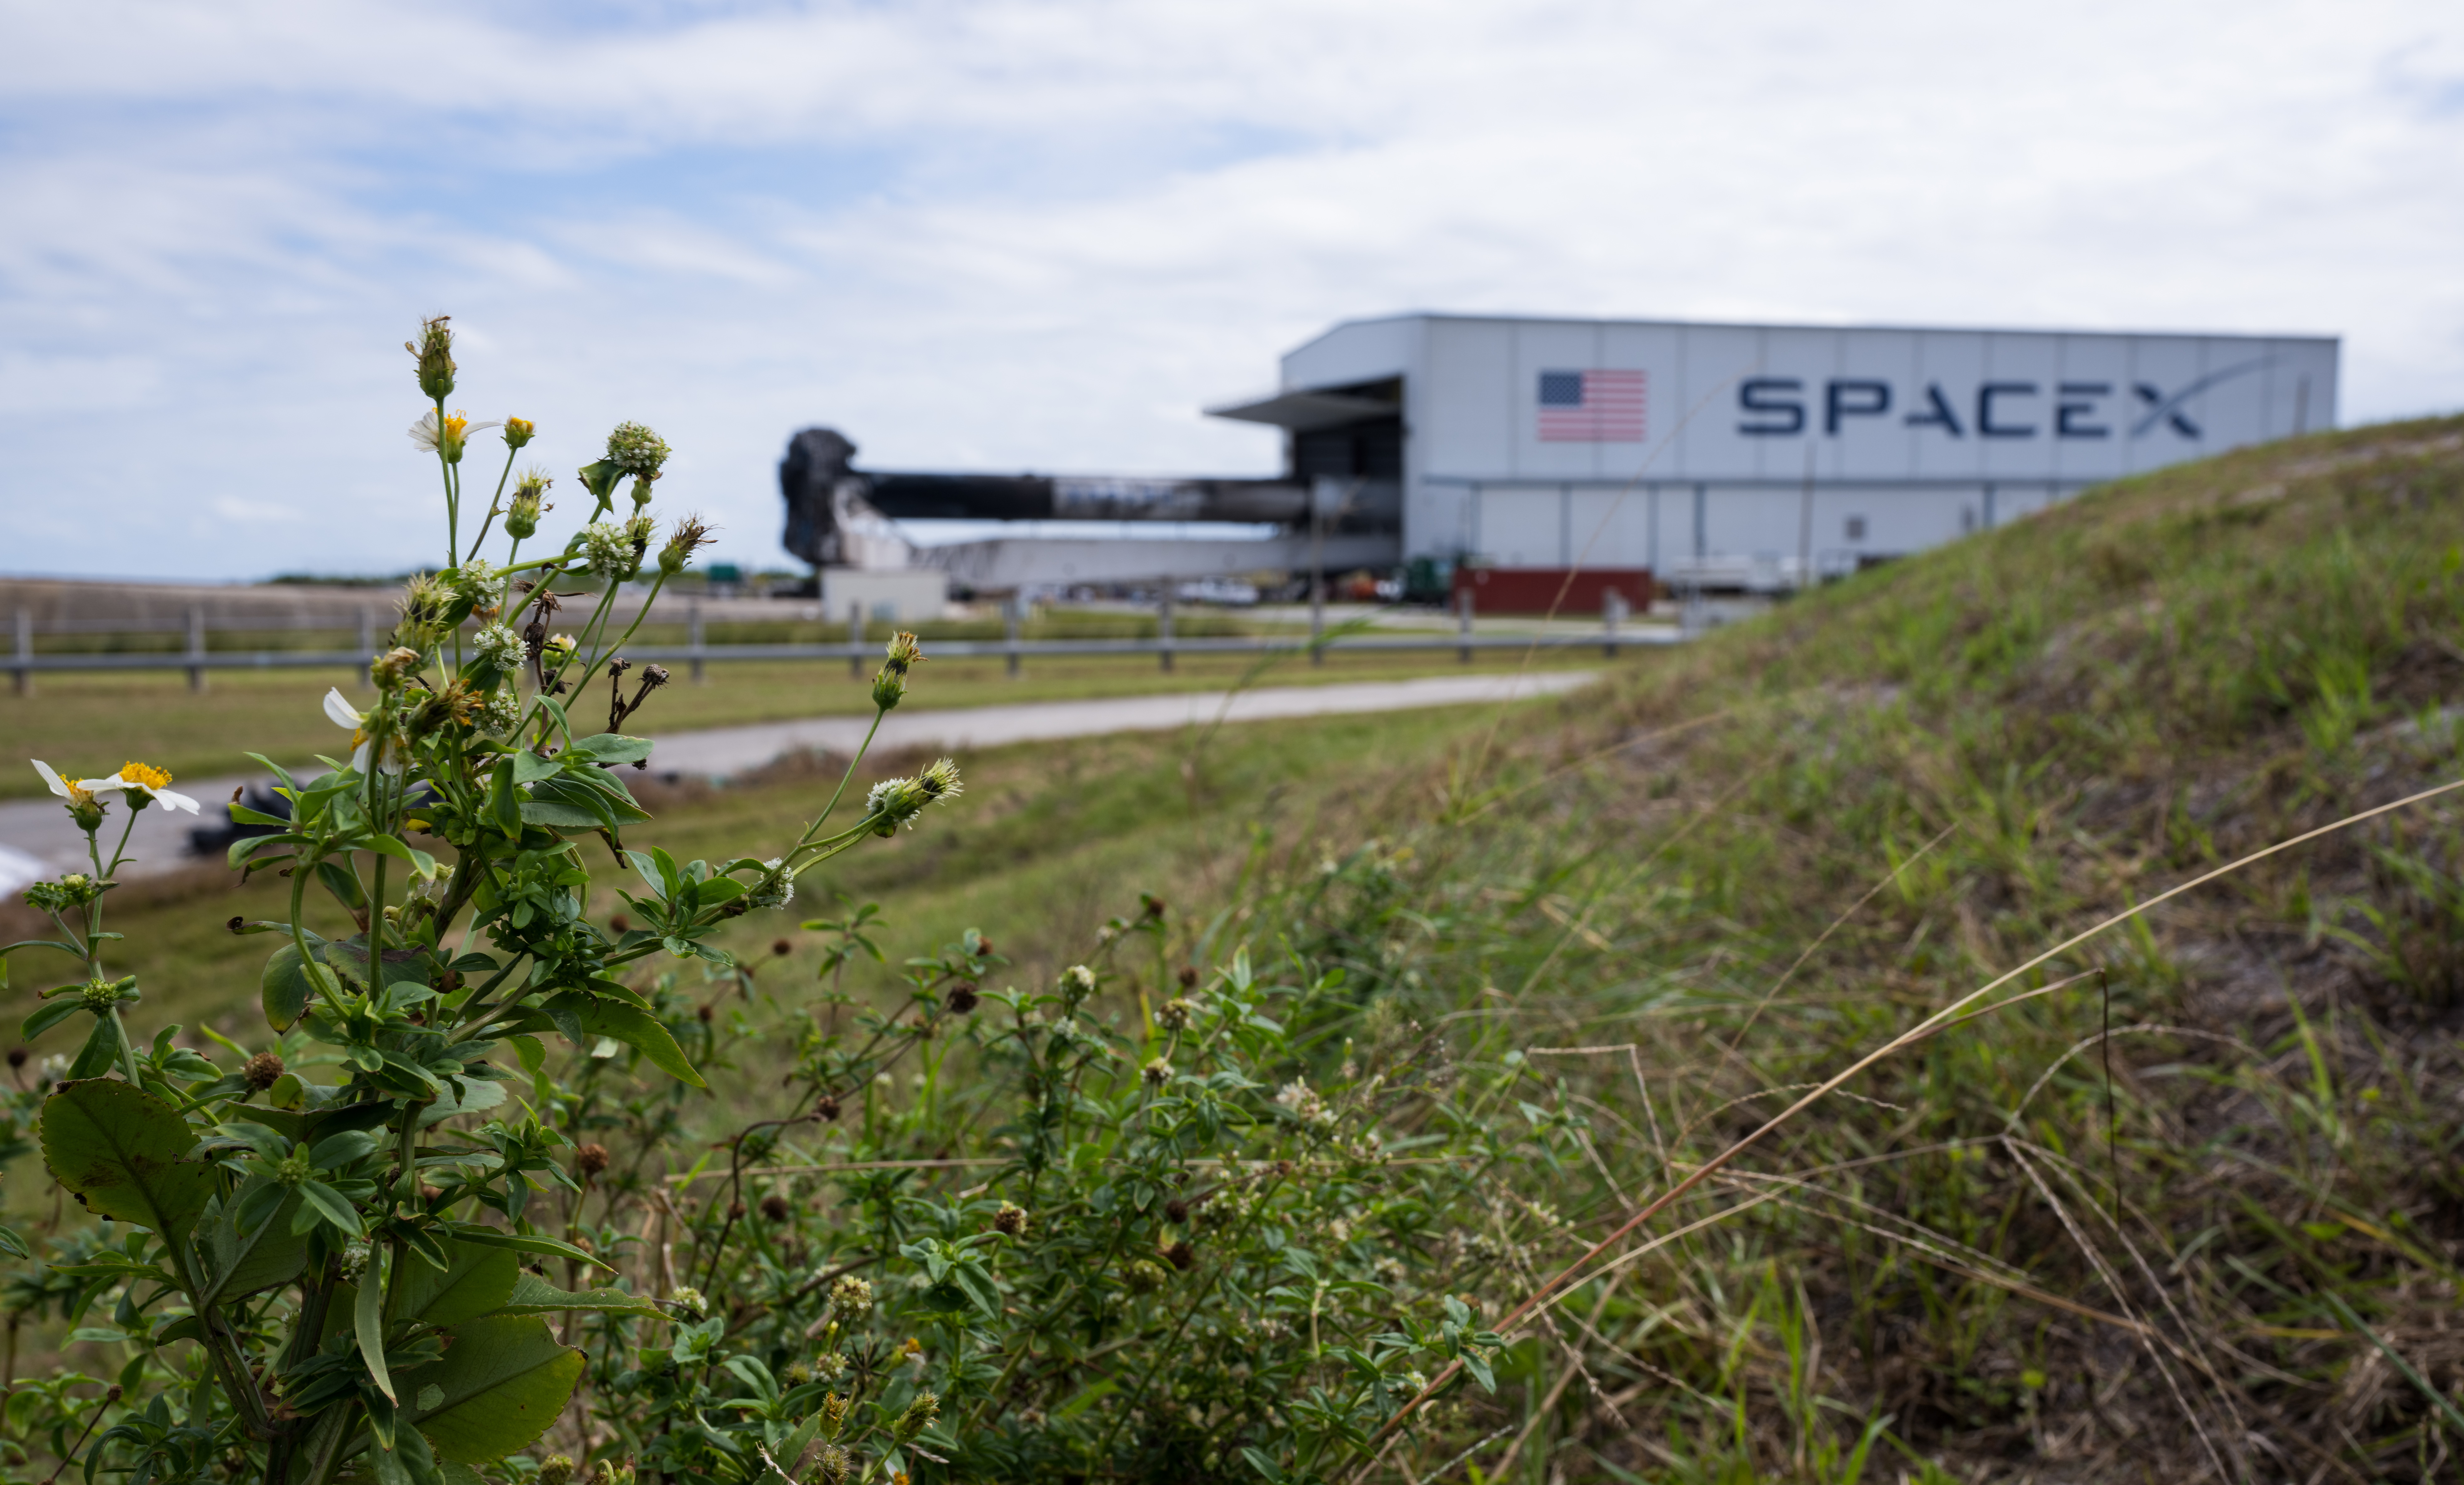 In the foreground, a plant with several small white and yellow flowers is in focus near a grassy hill. In the distance, the SpaceX Falcon Heavy rocket and Psyche spacecraft roll out of a large rectangular building with "SpaceX" and an American flag on the side.